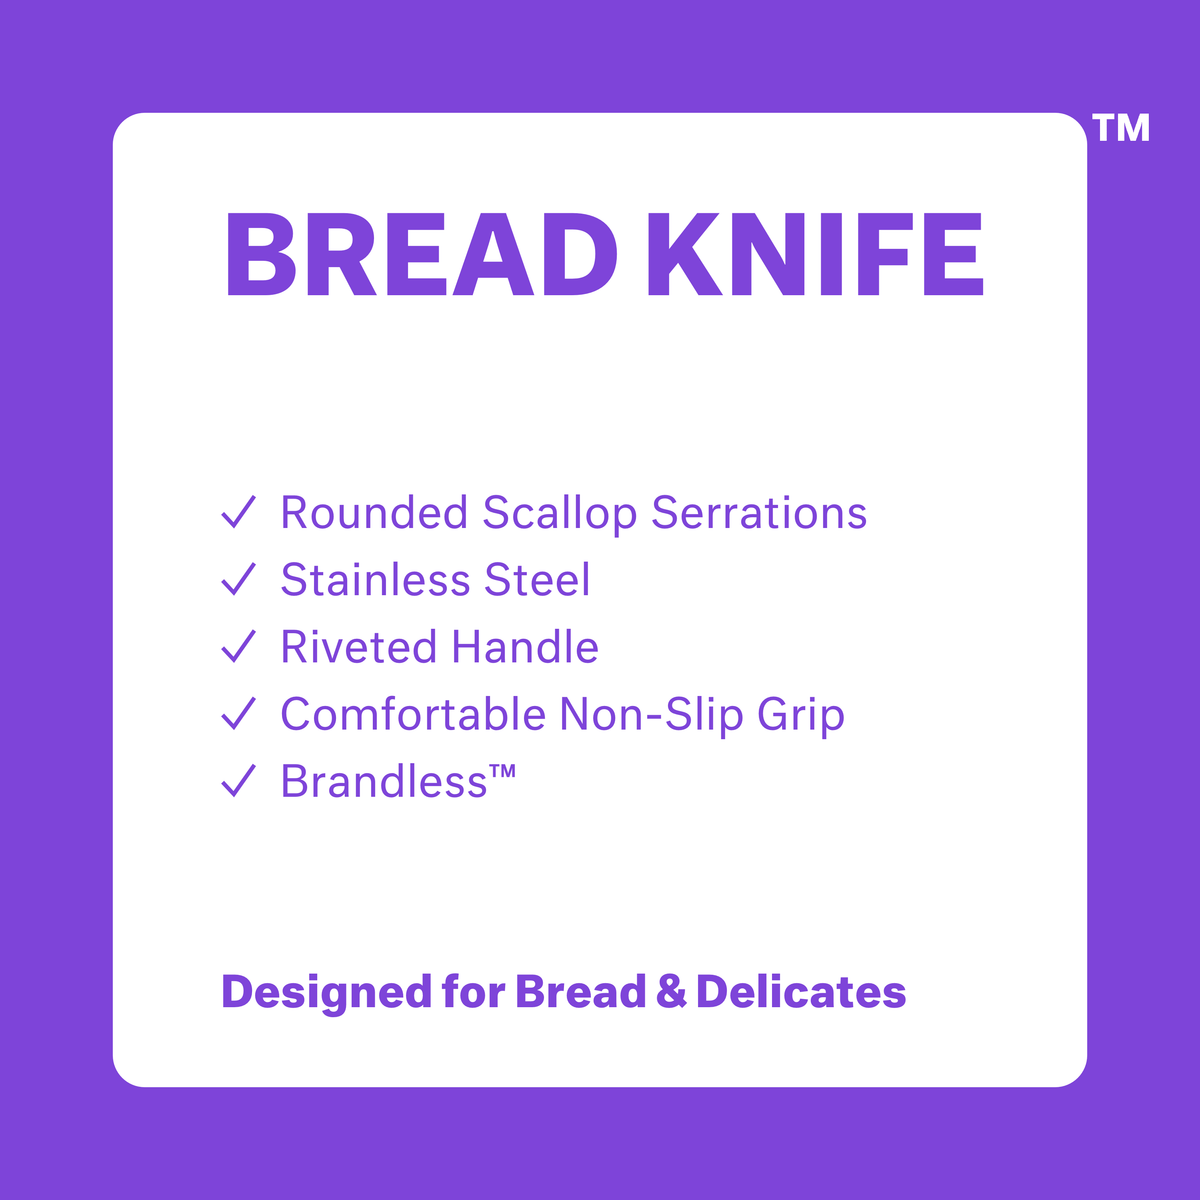 Bread Knife.  Rounded scallop serrations.  Stainless steel.  Riveted handle. Comfortable non-slip grip.  Brandless.  Designed for bread and delicates.